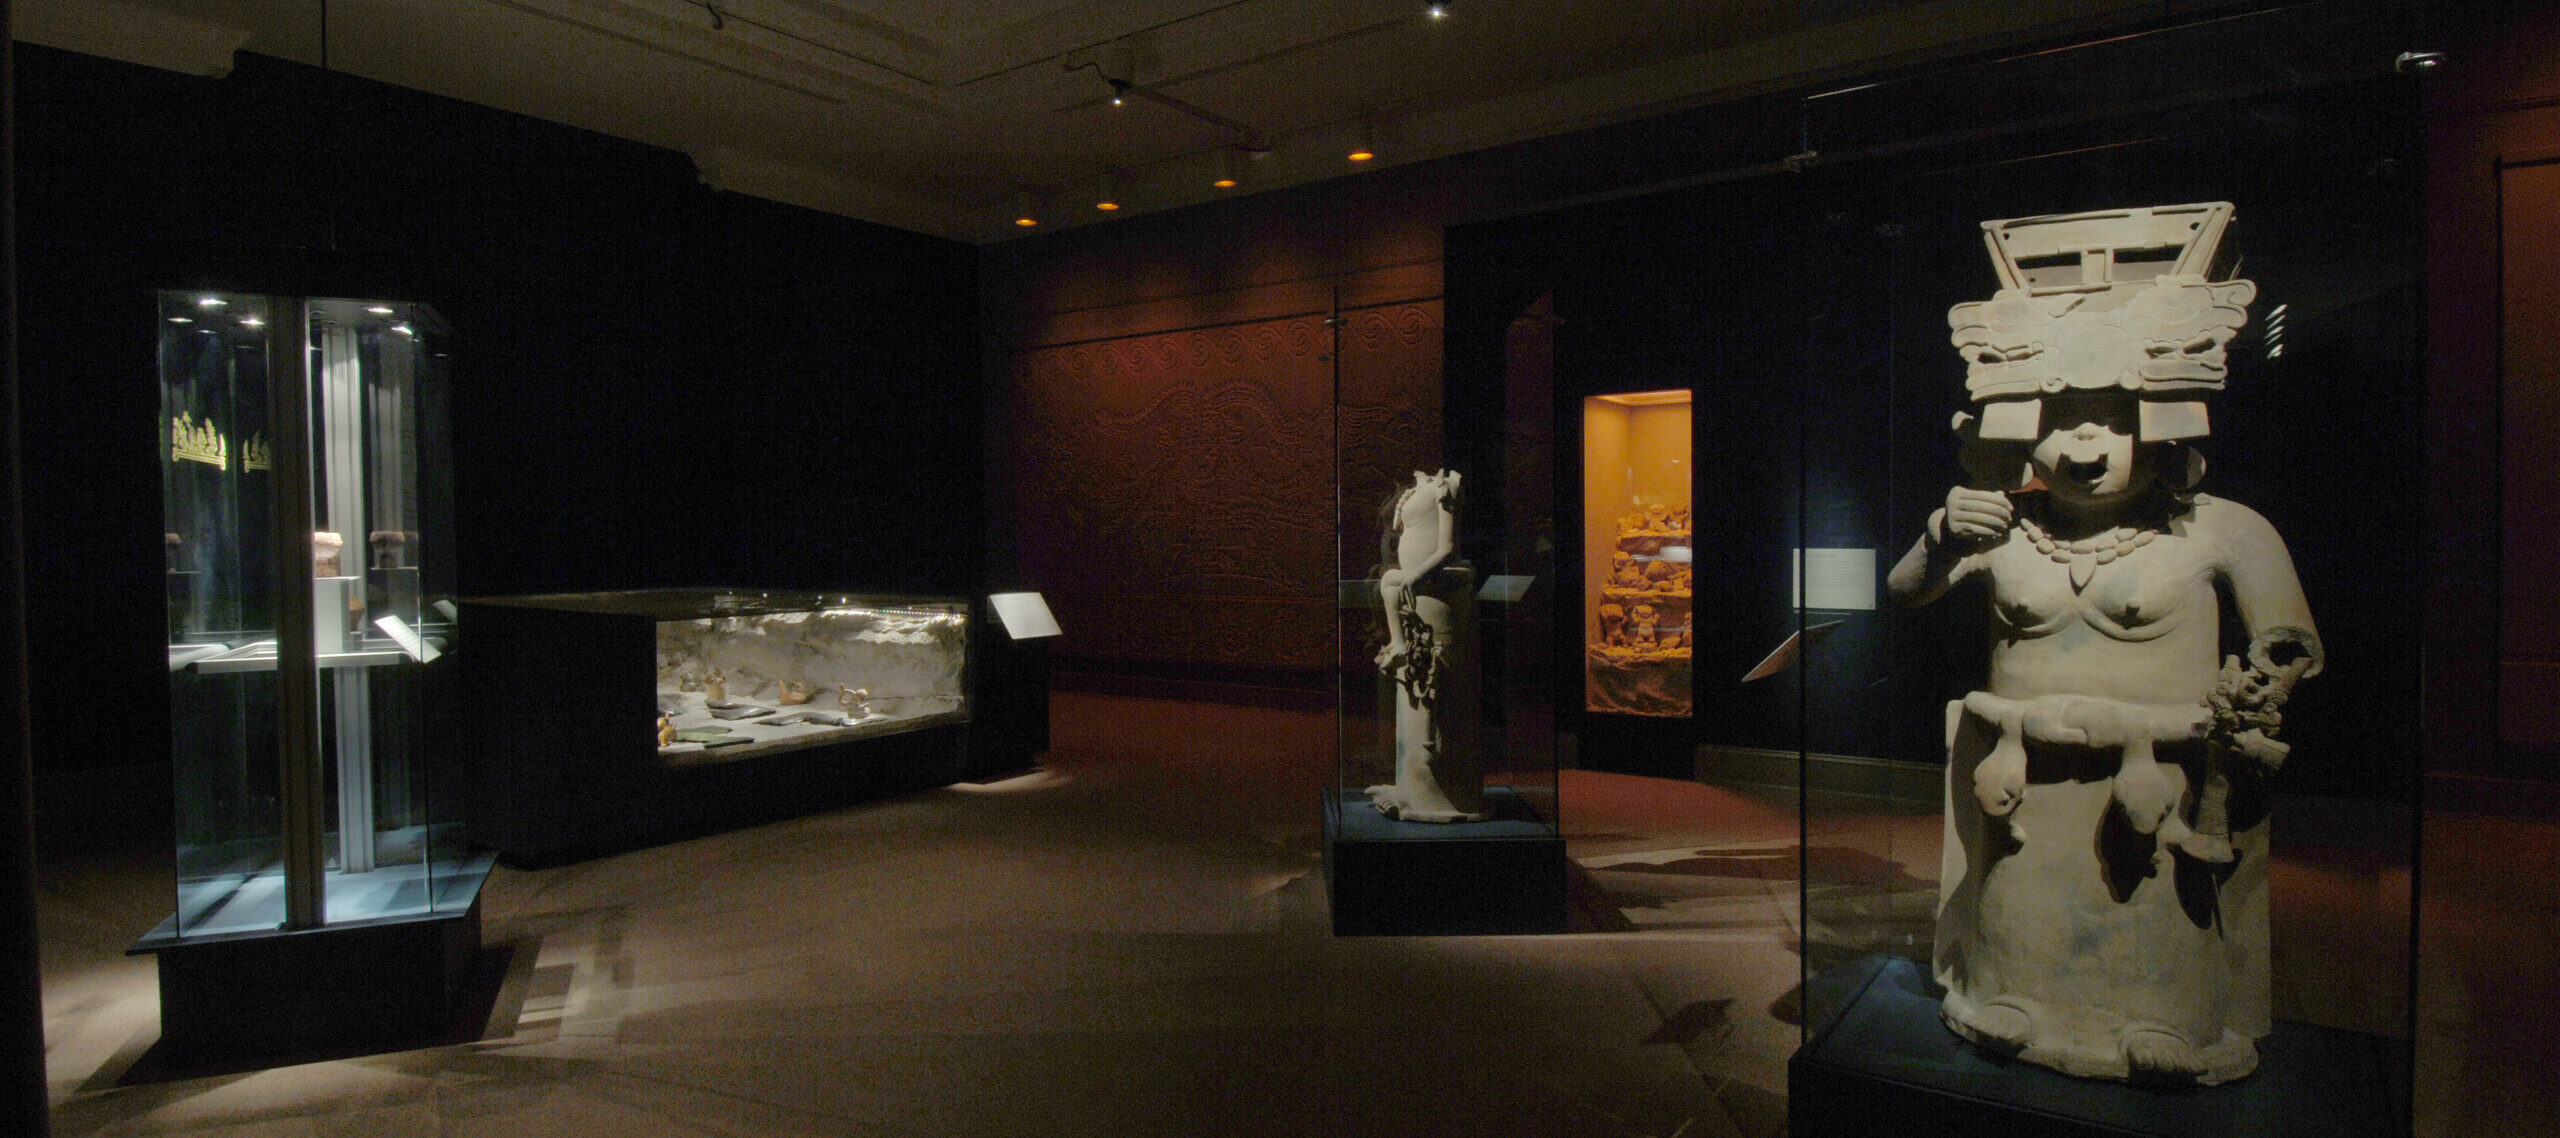 In a dark room, there are several artifacts standing on pedestals and sitting in glass cabinets. On the right, there is an ancient stone sculpture with a large headdress and snakes around their hip, presumably a god or goddess.